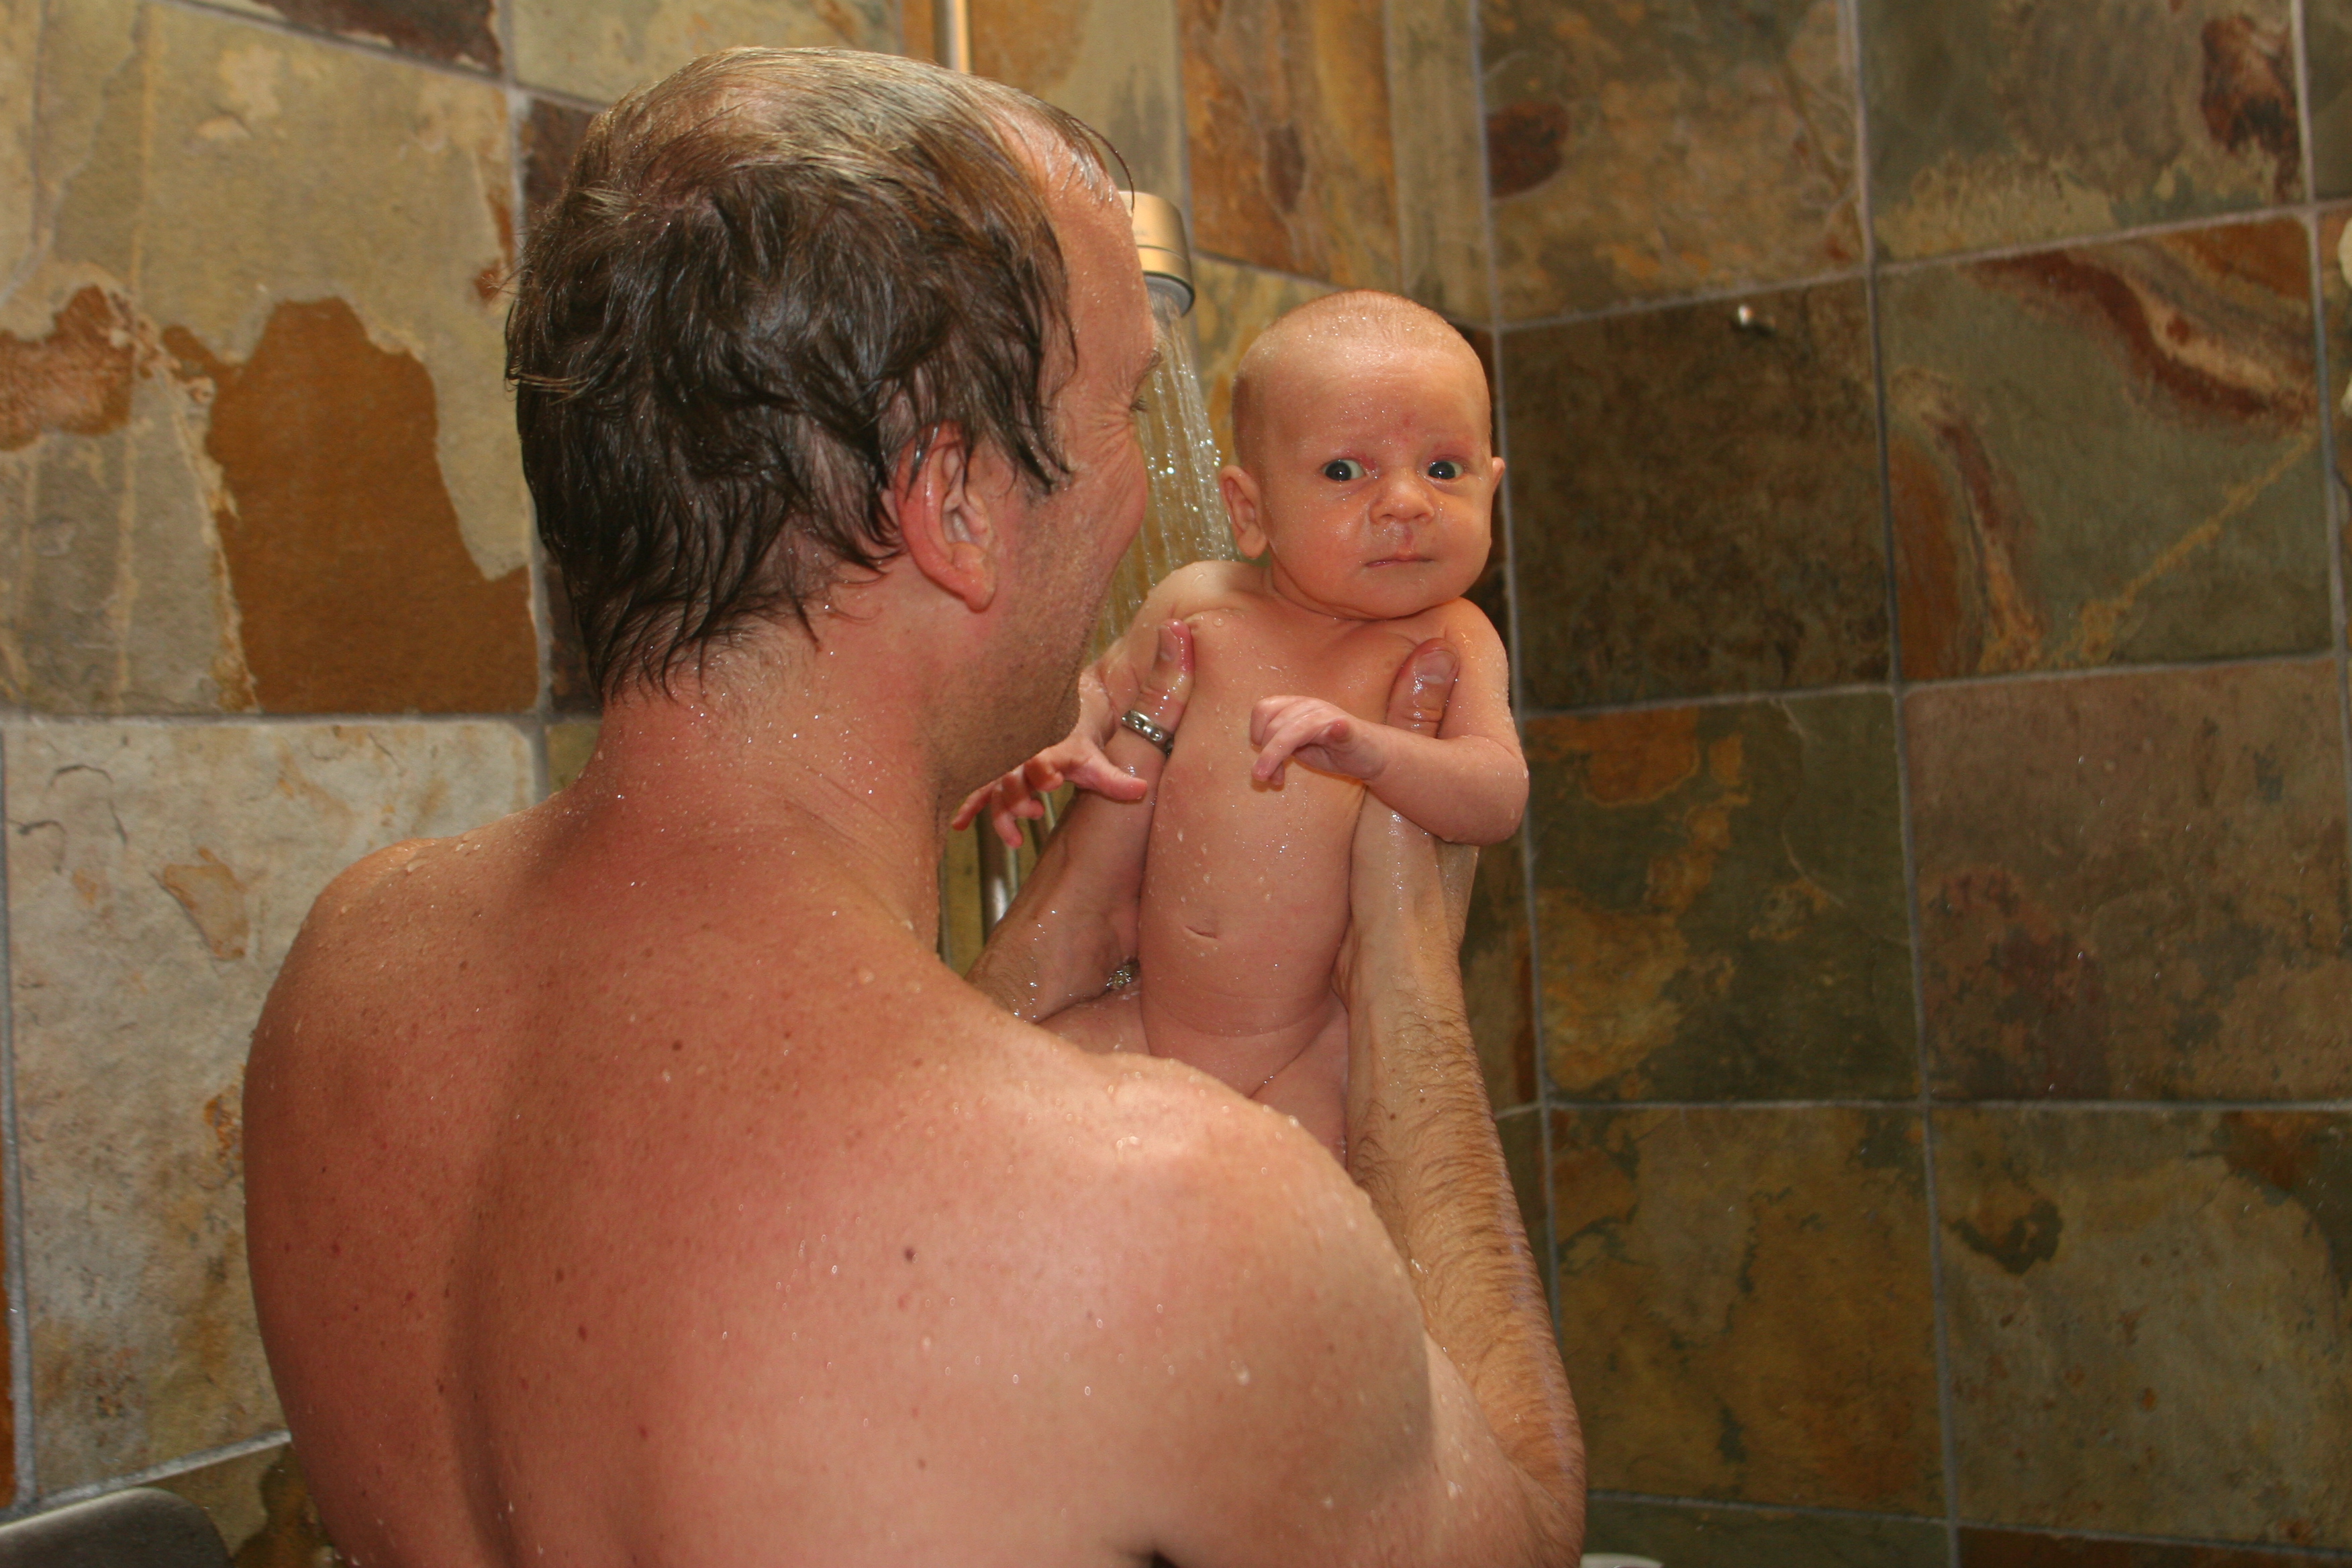 Shower Time - Father with baby.jpg. 